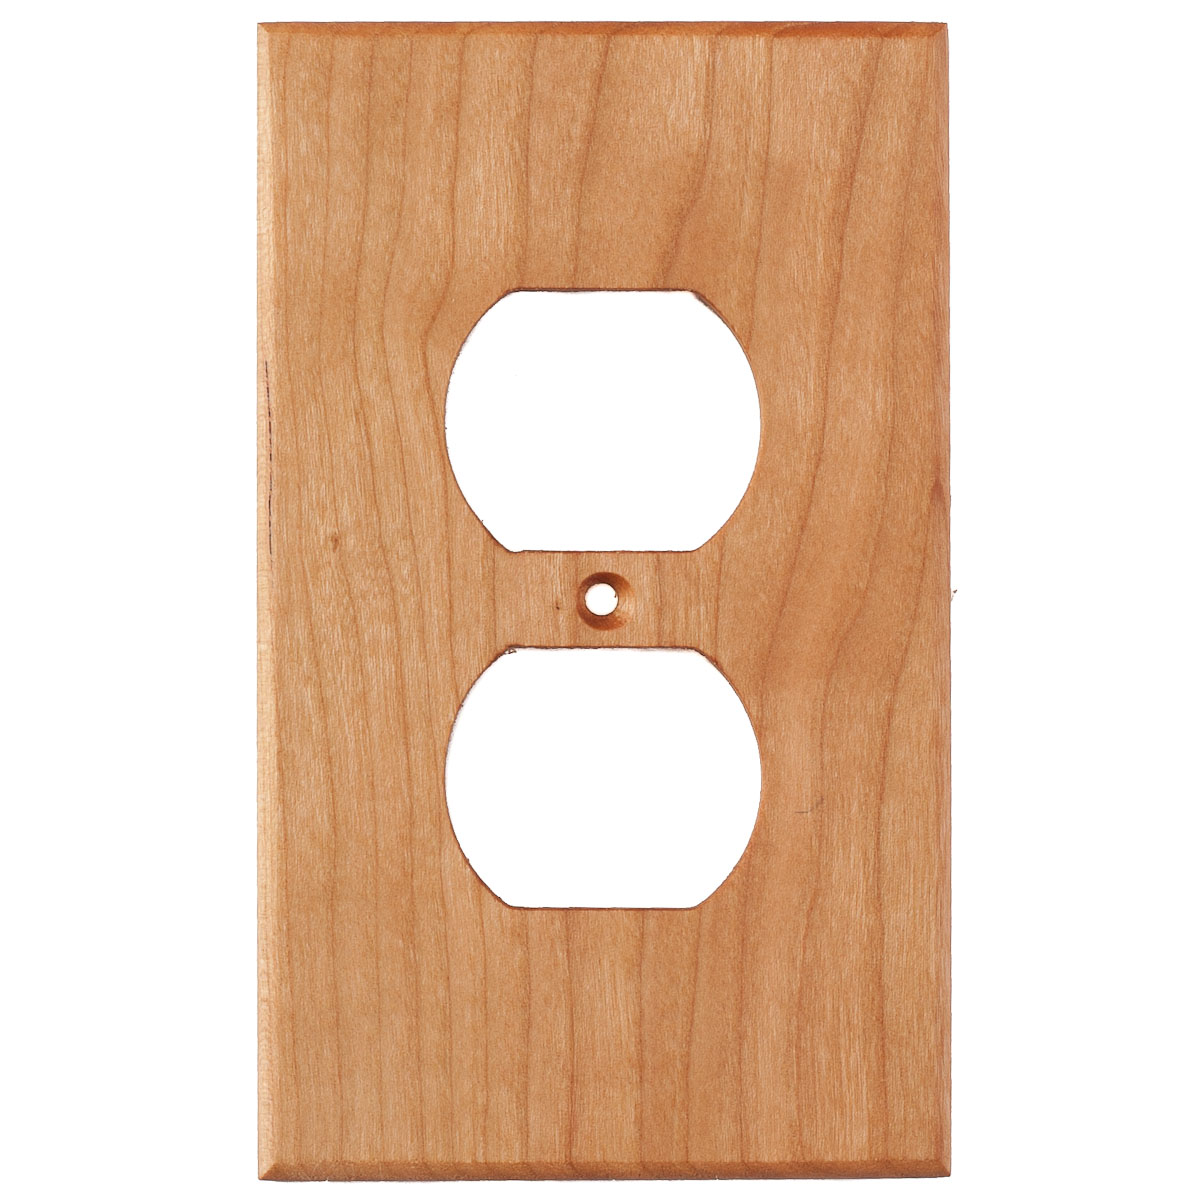 Cherry Wood Wall Plate - 1 Gang Duplex Outlet Cover